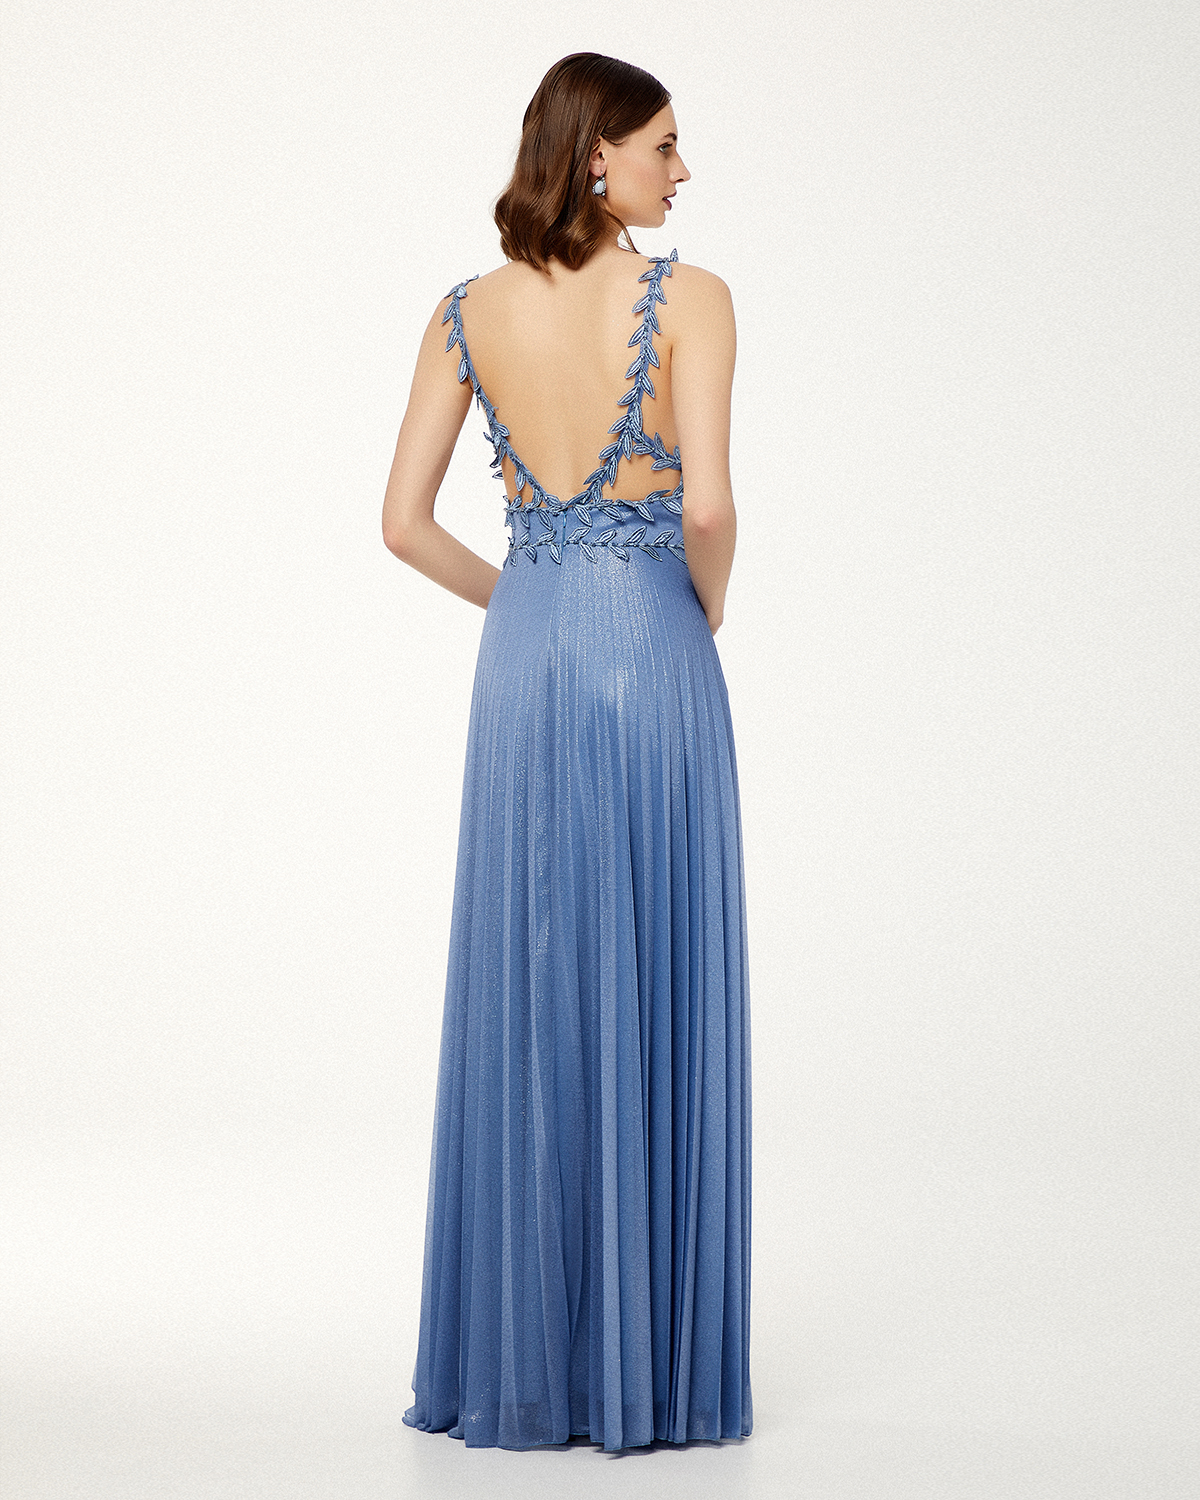 Long cocktail dress with shining fabric and straps